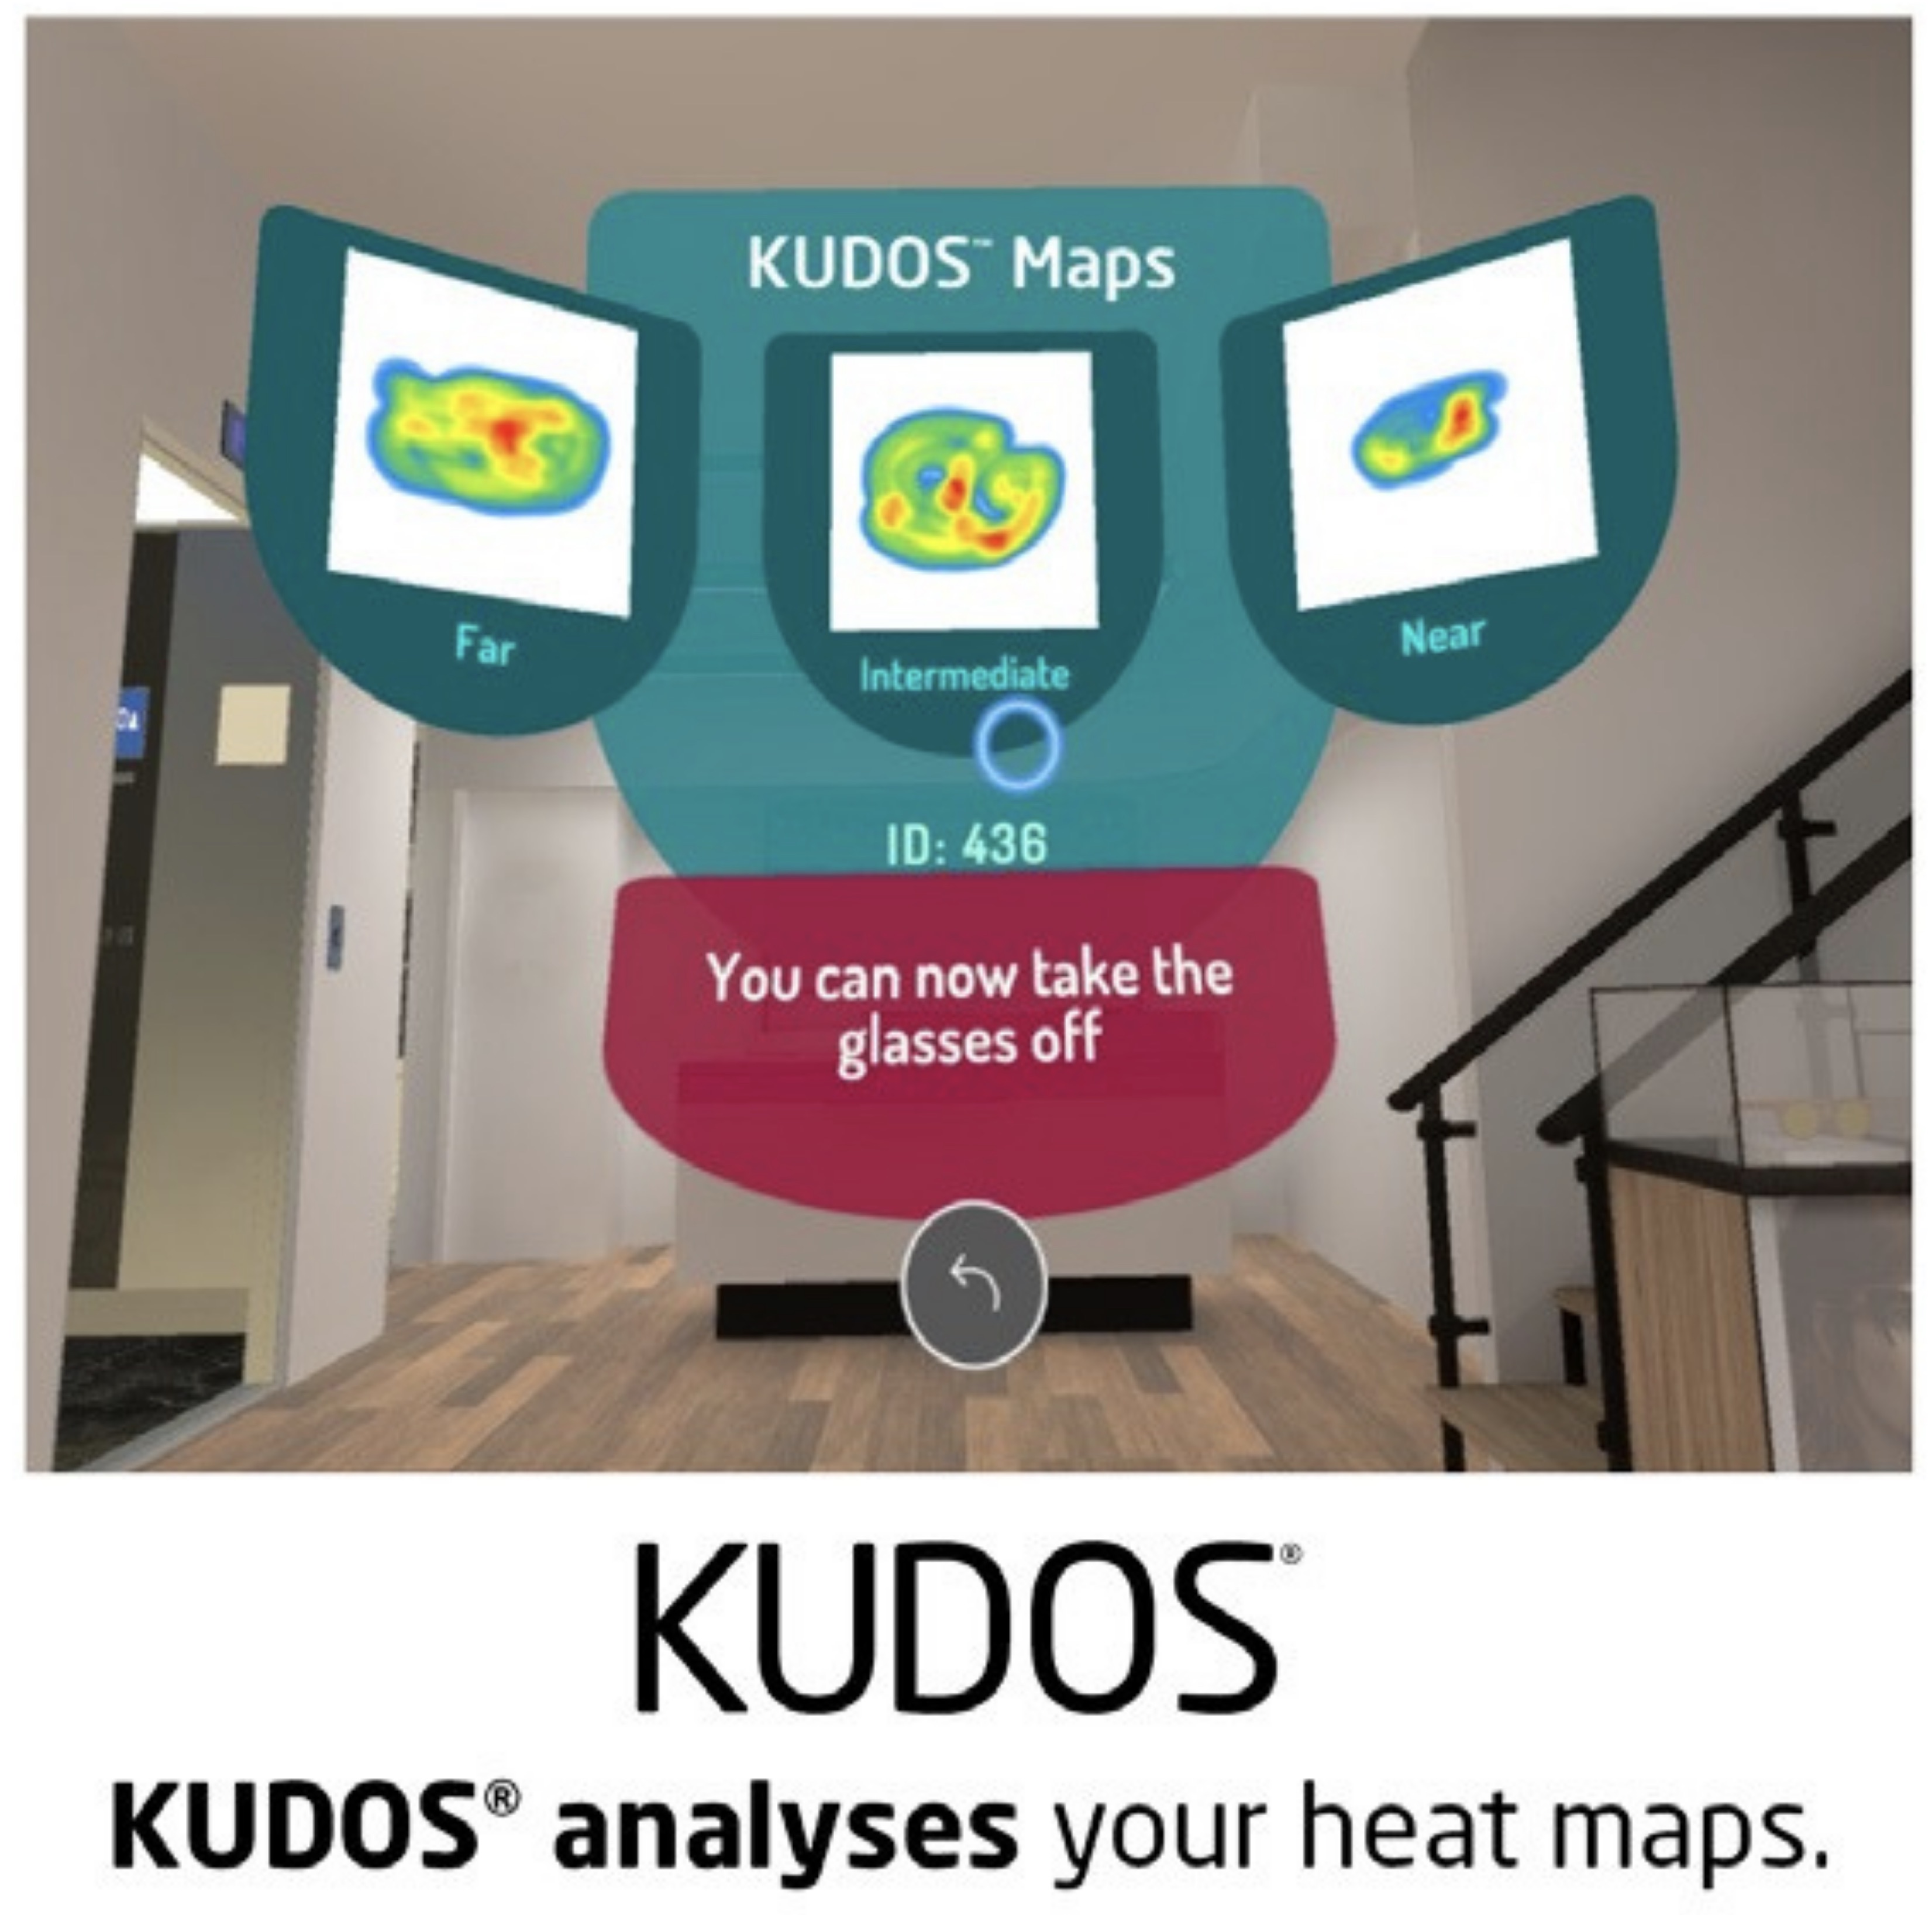 3d view from within KUDOS headset - KUDOS analyses your heatmaps